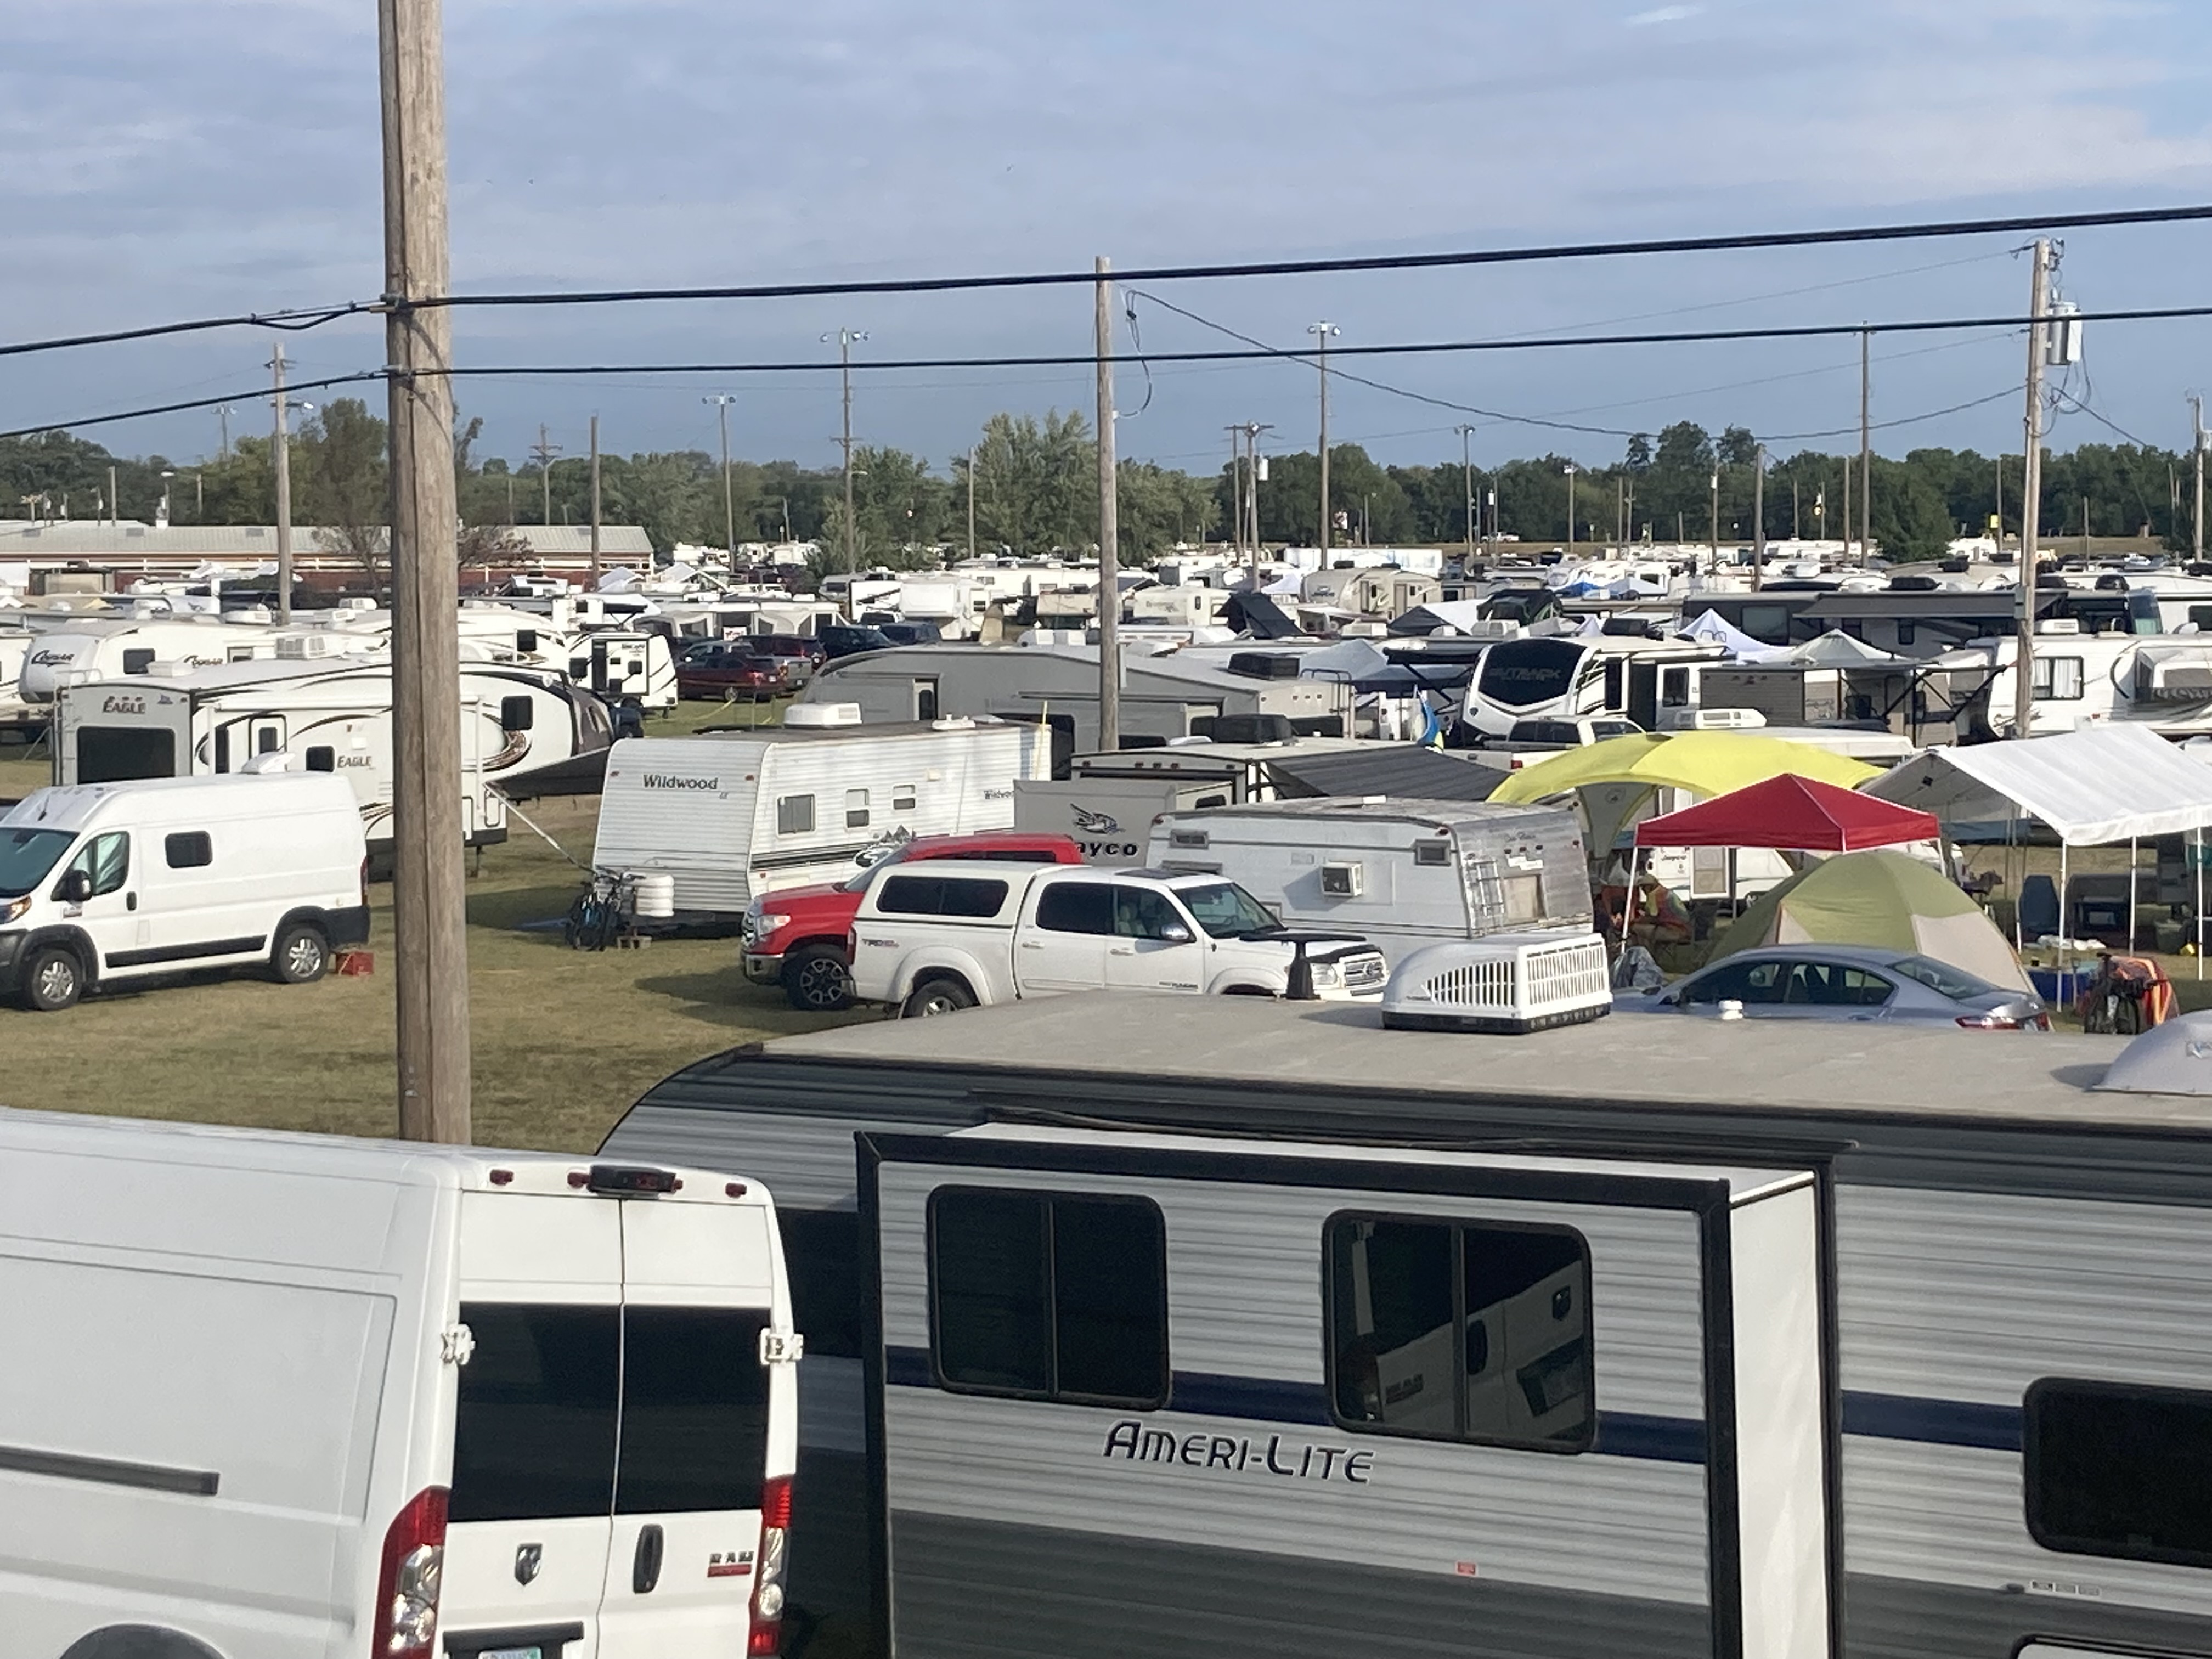 Recreational vehicles parked at the Walnut Valley festival in Winfield, Kansas.